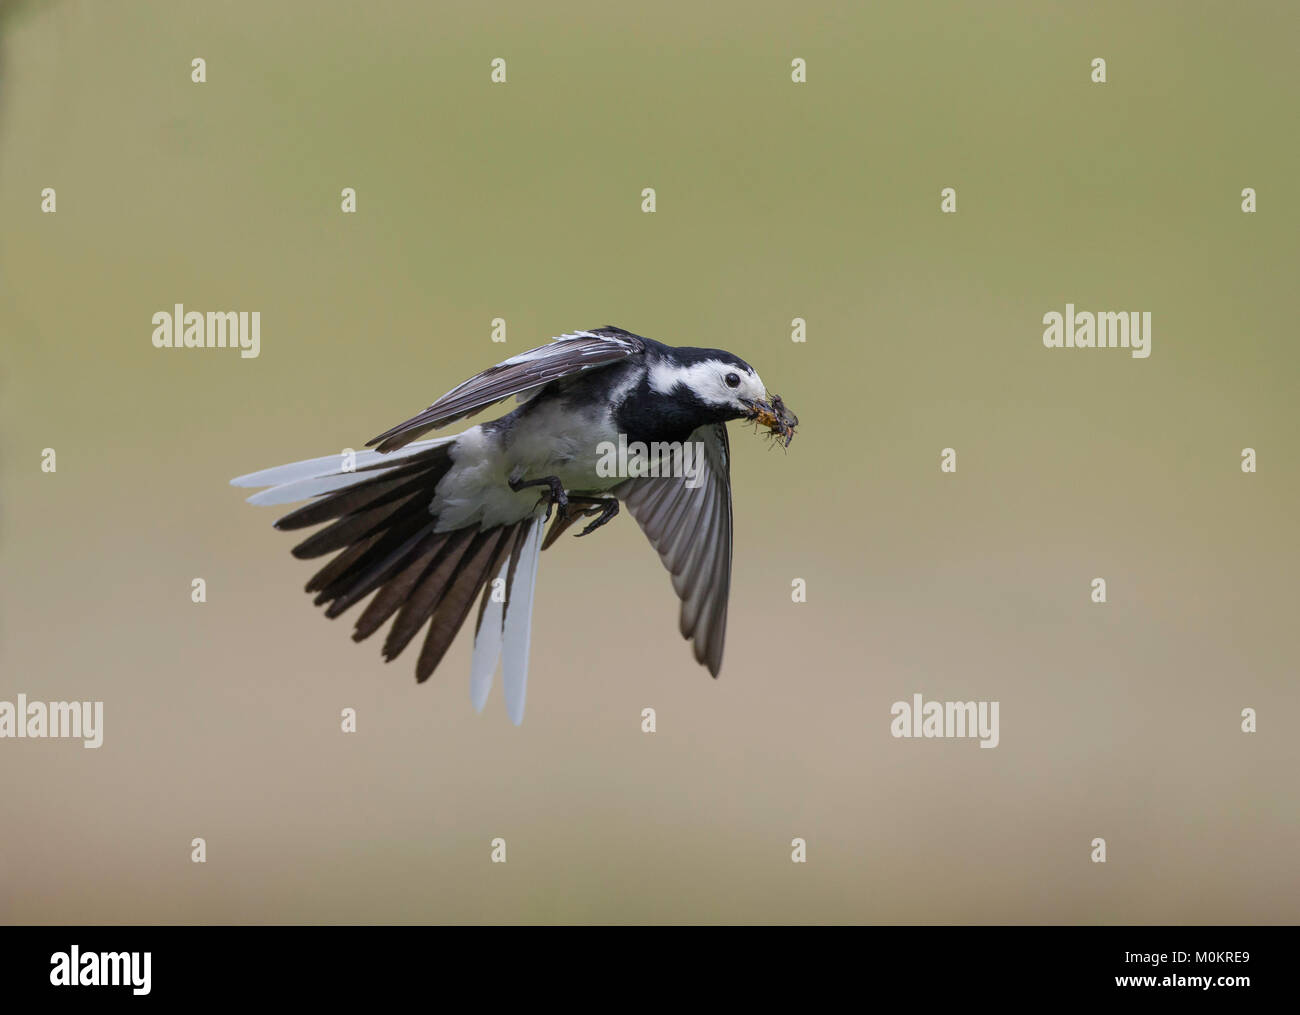 Pied Wagtail - Motacilla alba, in flight against a plain background, catching flies Stock Photo